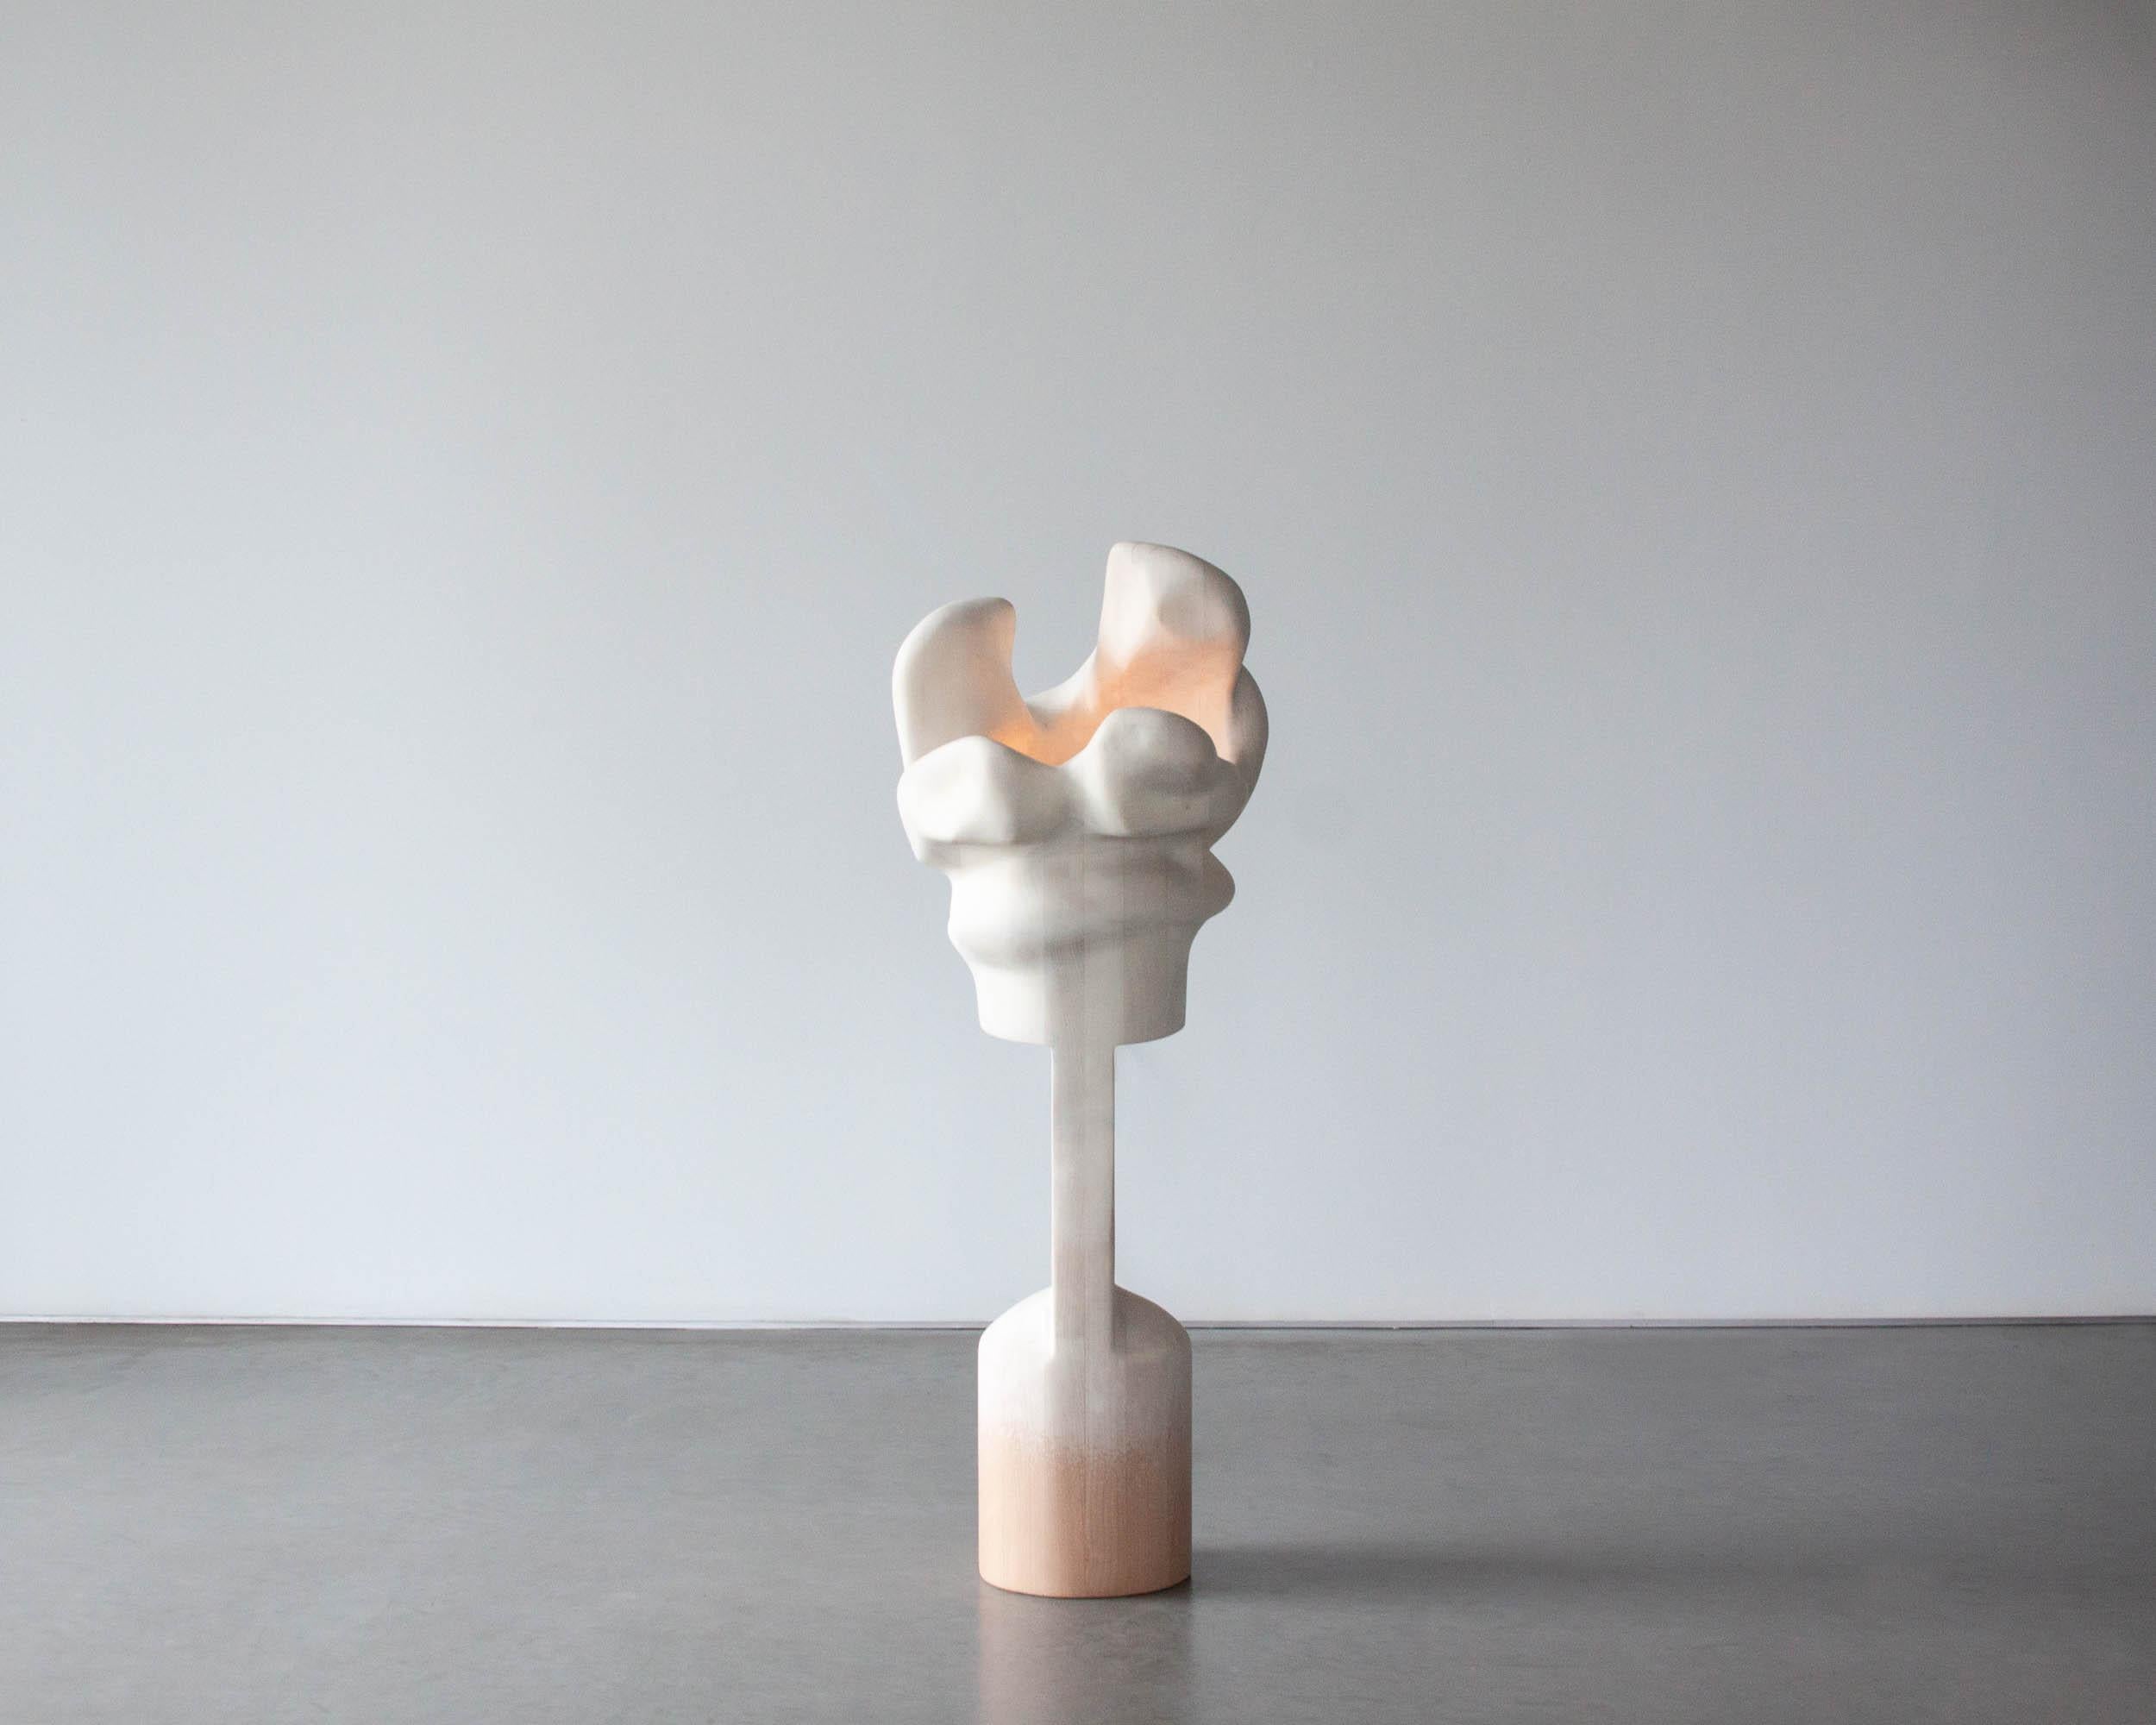 Vincent Pocsik’s sculptural works are a study of human form abstracted down to the point of its most transformative power. Flesh twists, contracts, pushes against bones and skin and sinew, giving way to transformations of the self and the body that